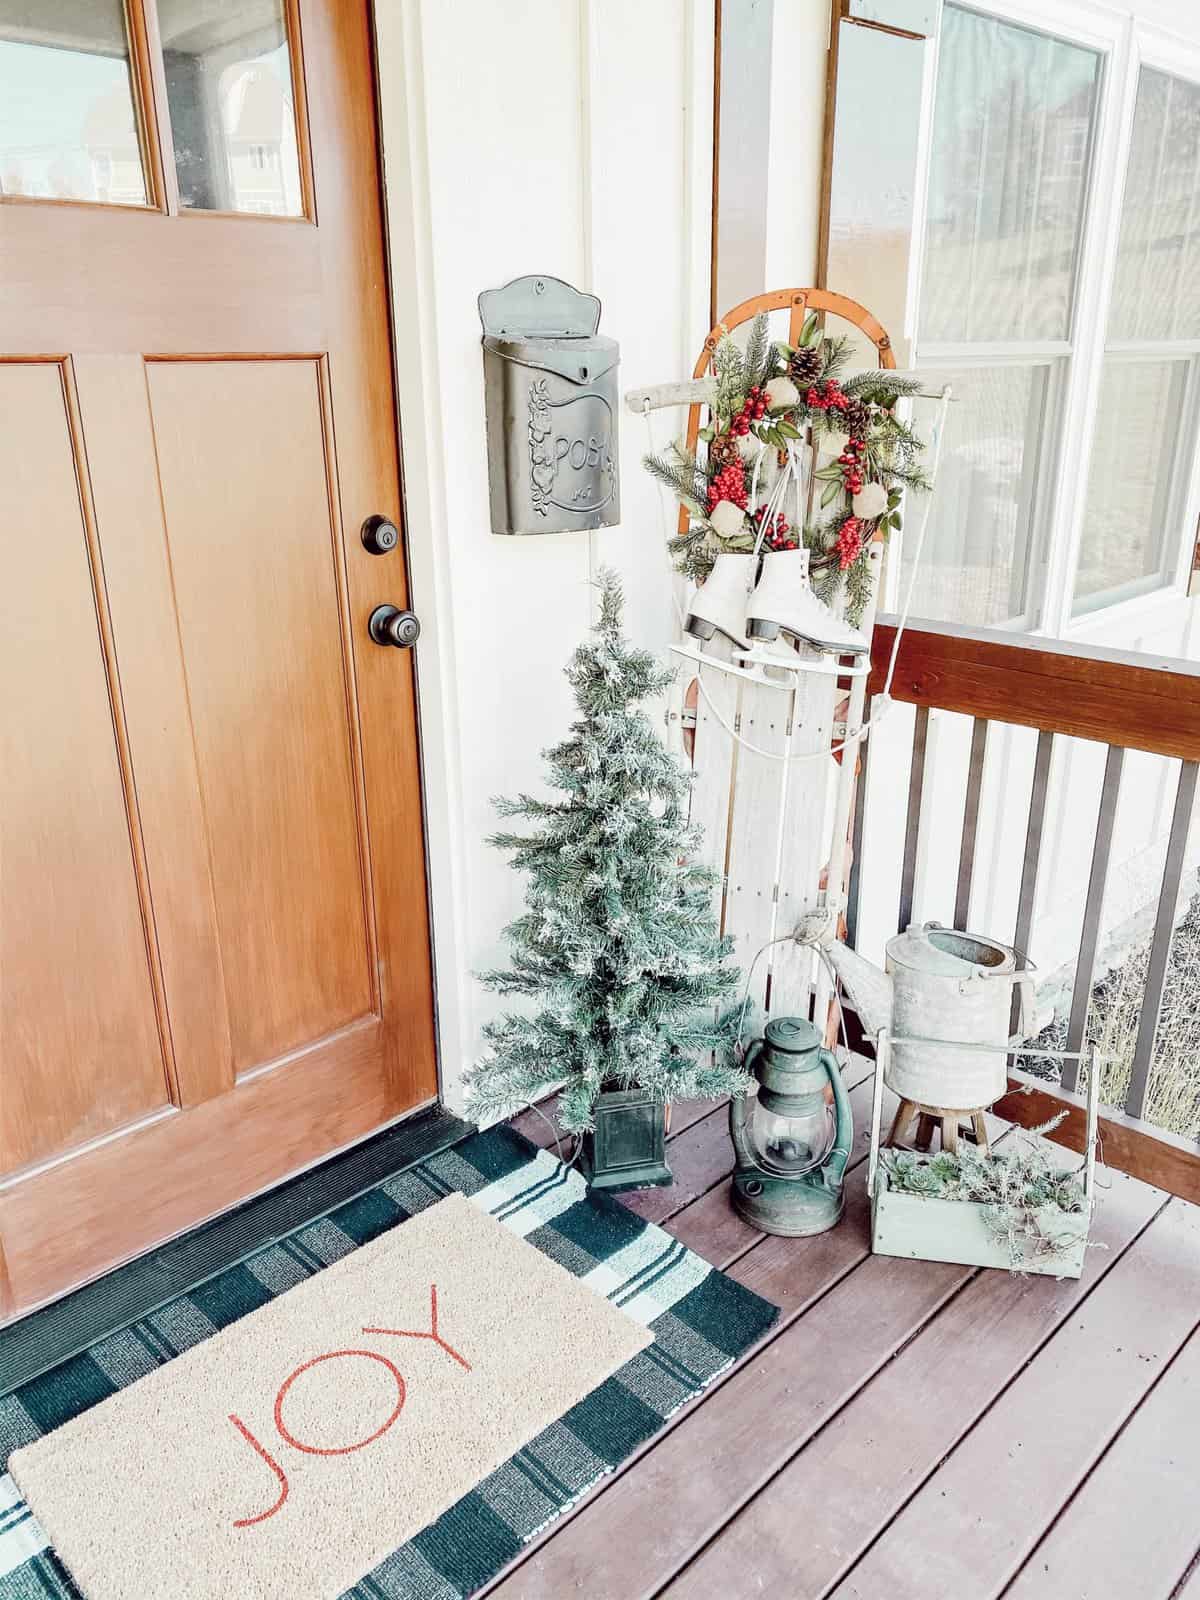 Creating a Welcoming Christmas Front Porch With Just a Few Simple Touches